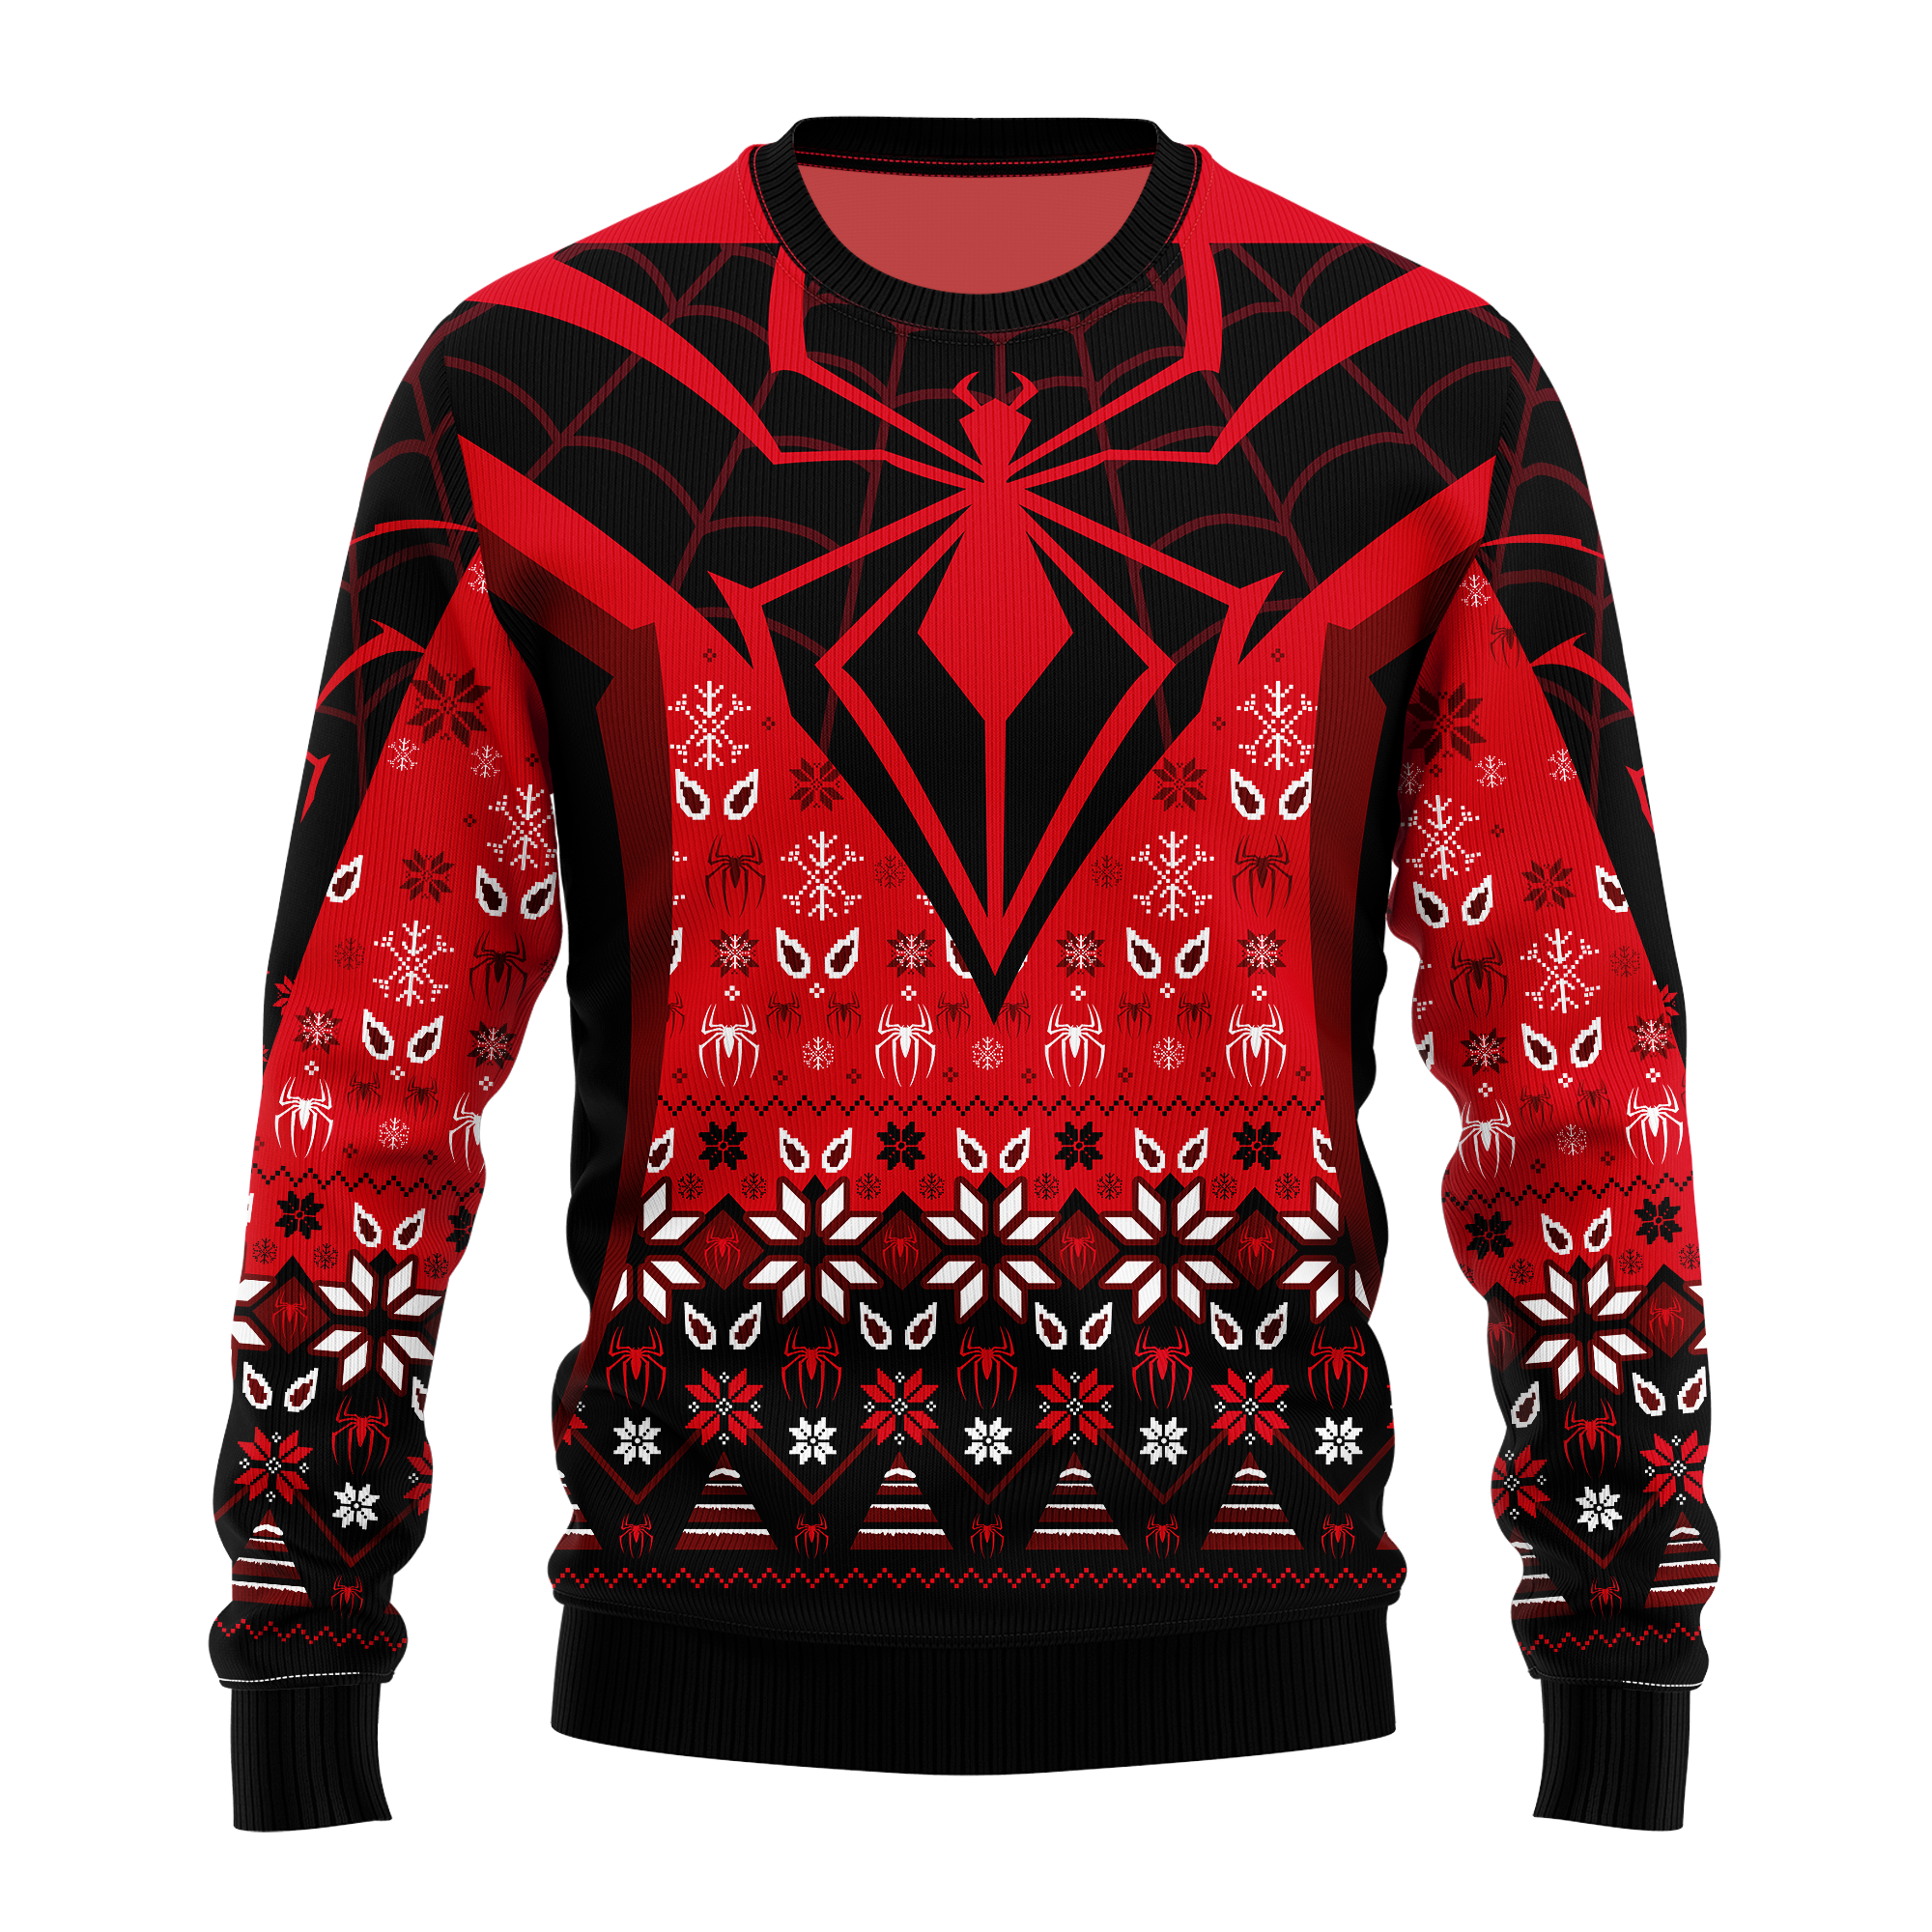 Spider Man Ugly Christmas Sweater Xmas Gift